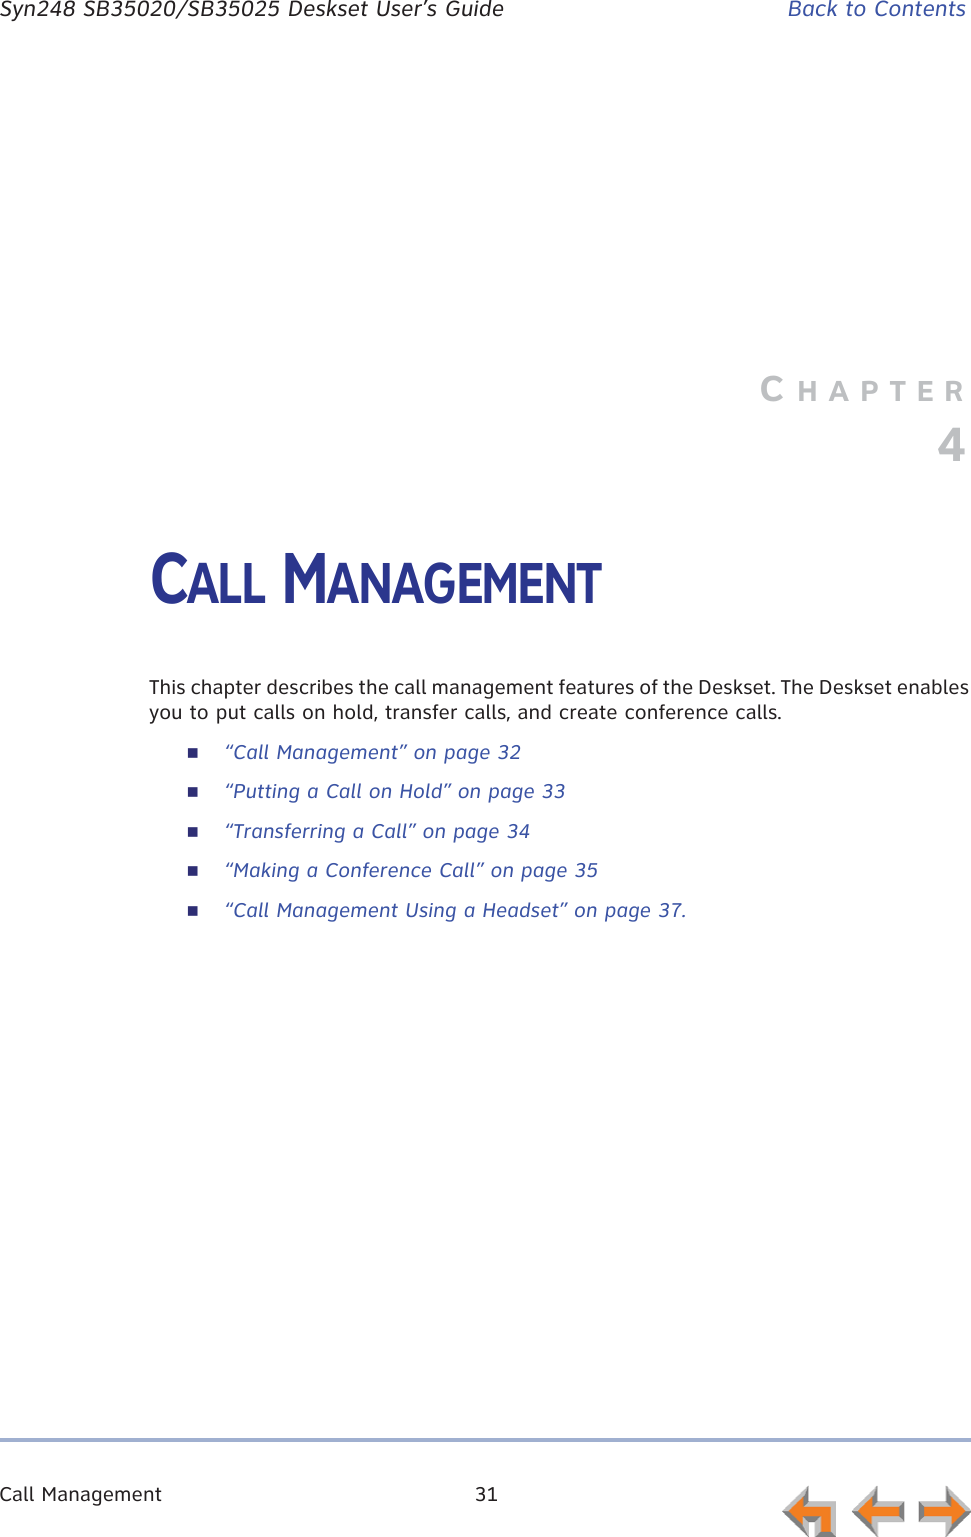 Call Management 31      Syn248 SB35020/SB35025 Deskset User’s Guide Back to ContentsCHAPTER4CALL MANAGEMENTThis chapter describes the call management features of the Deskset. The Deskset enables you to put calls on hold, transfer calls, and create conference calls.“Call Management” on page 32“Putting a Call on Hold” on page 33“Transferring a Call” on page 34“Making a Conference Call” on page 35“Call Management Using a Headset” on page 37.